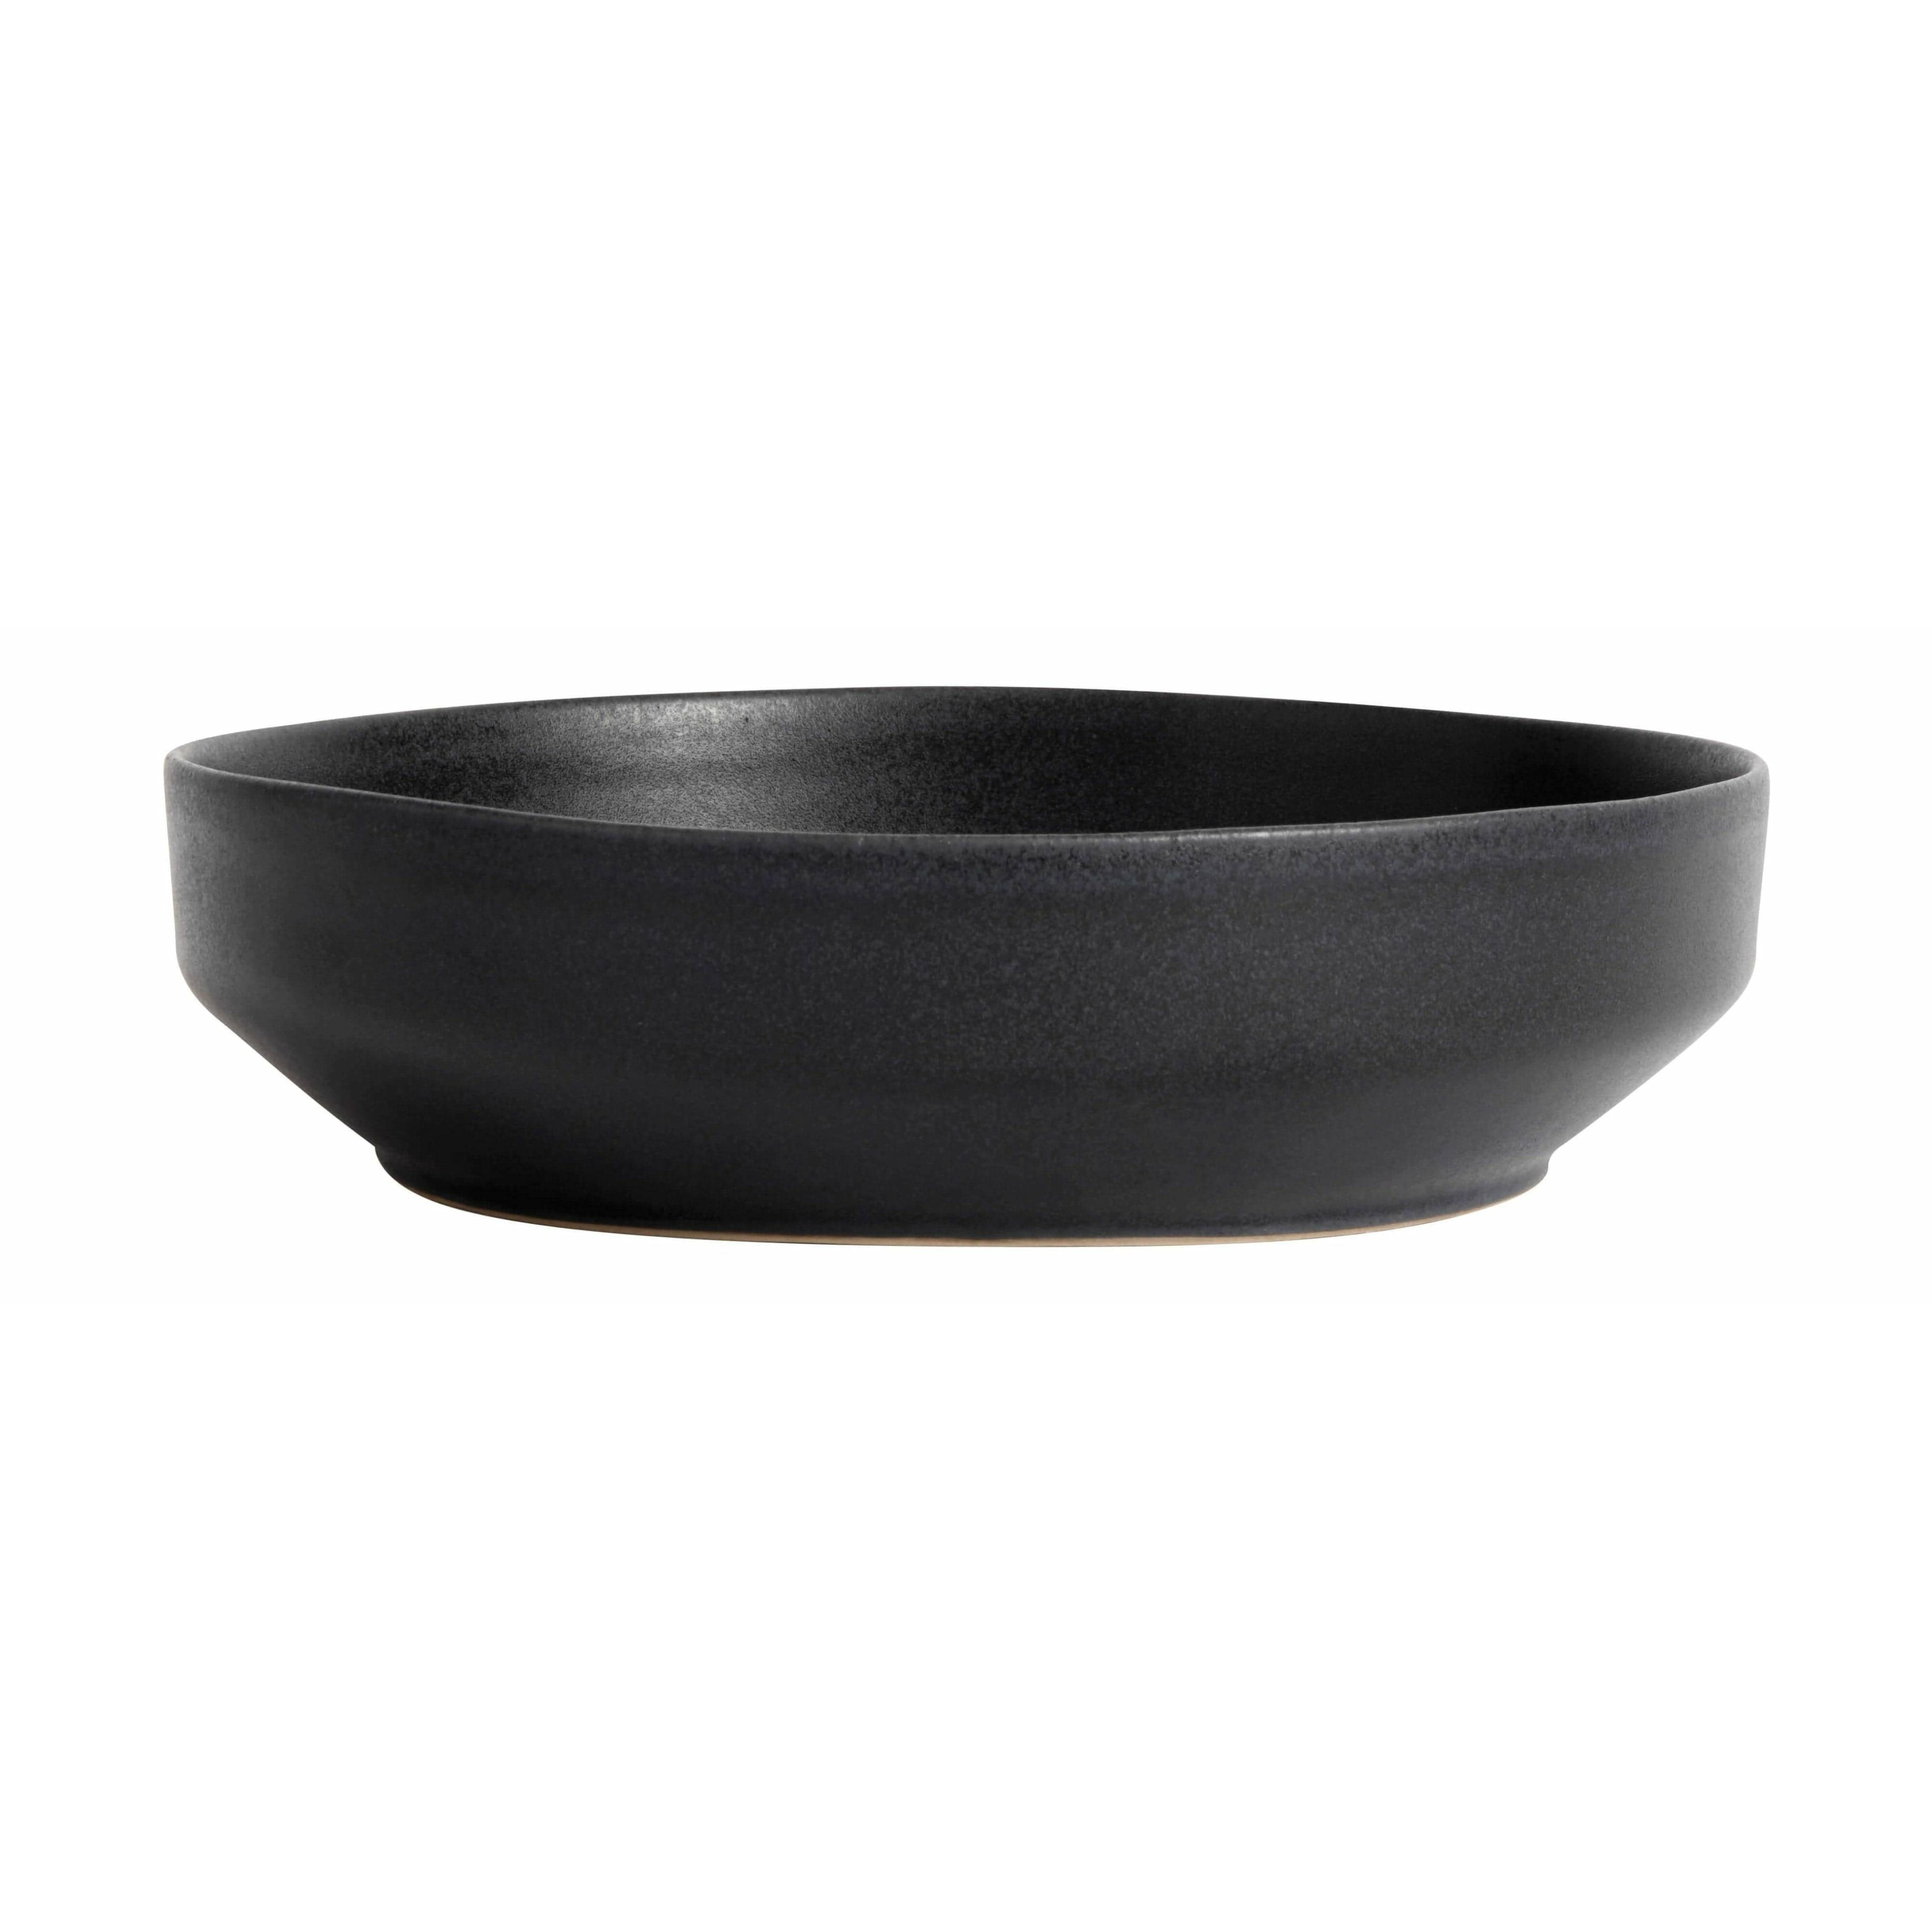 Muubs Ceto Serving Bowl Negro, 22 cm